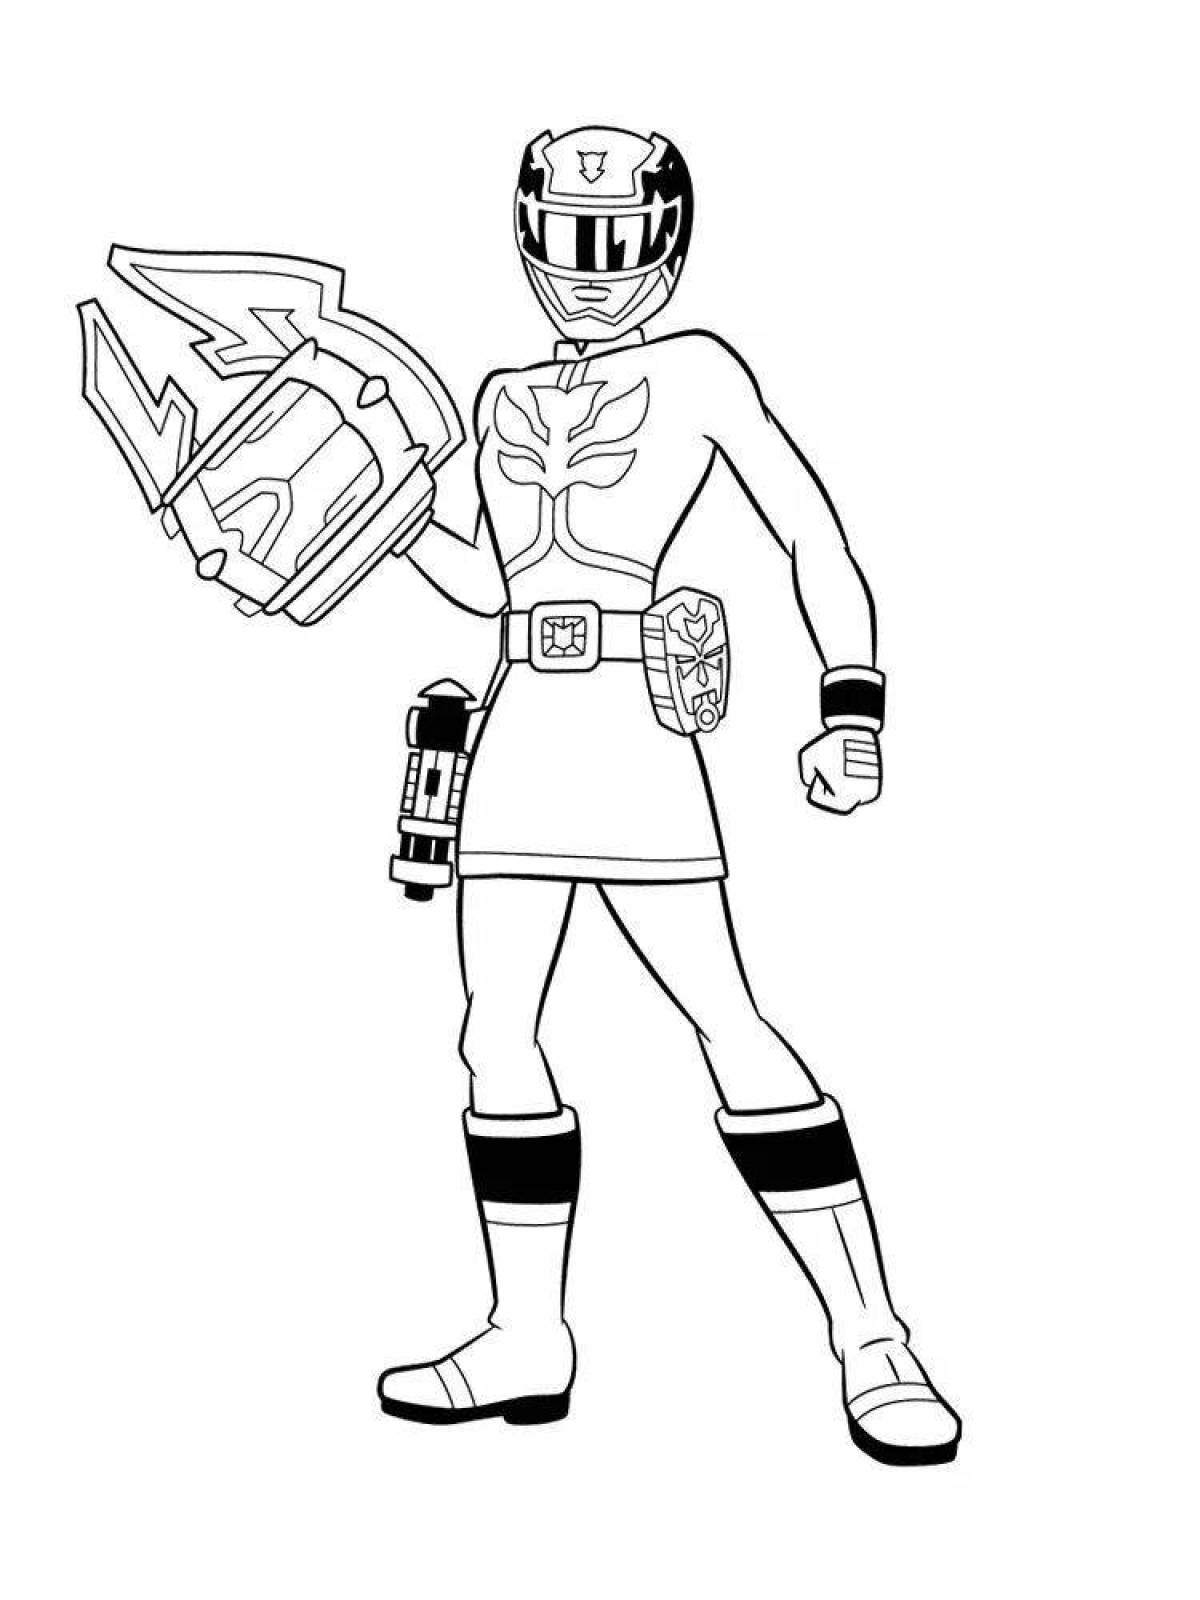 Dazzling Power coloring page